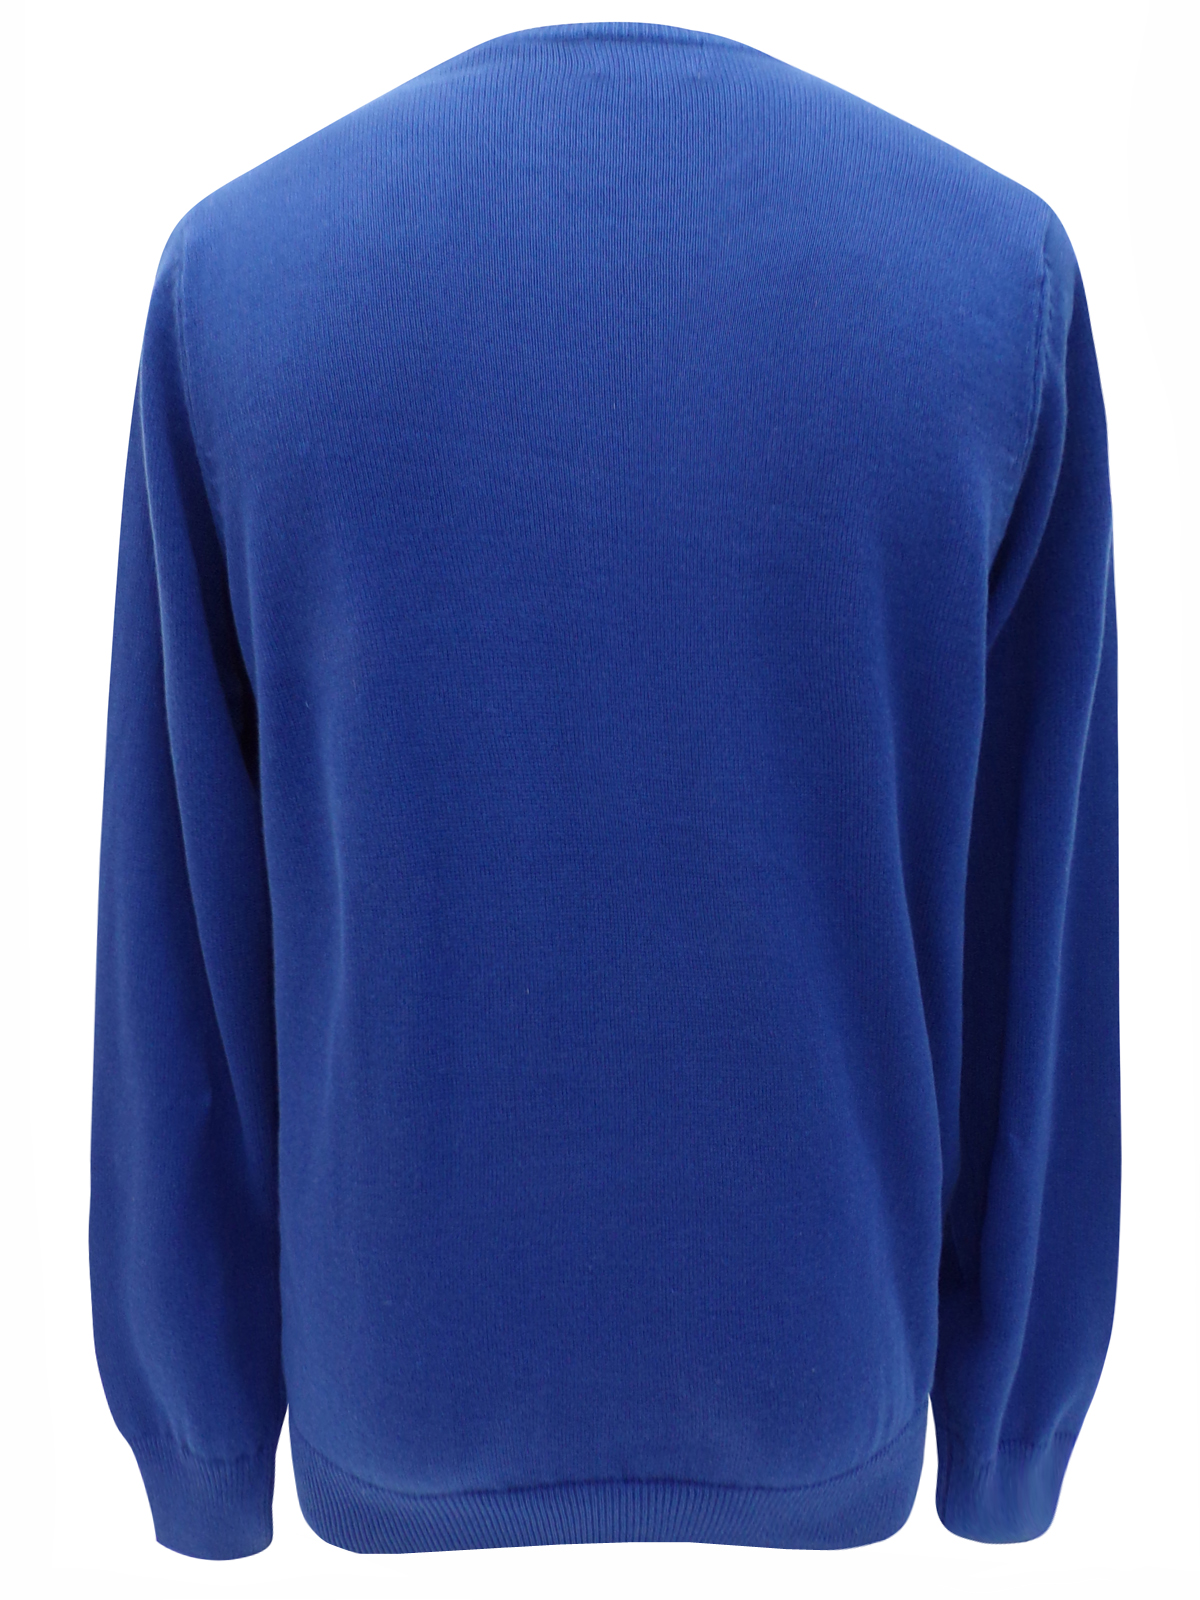 Marks and Spencer - - M&5 ROYAL-BLUE Pure Cotton Long Sleeve Jumper ...